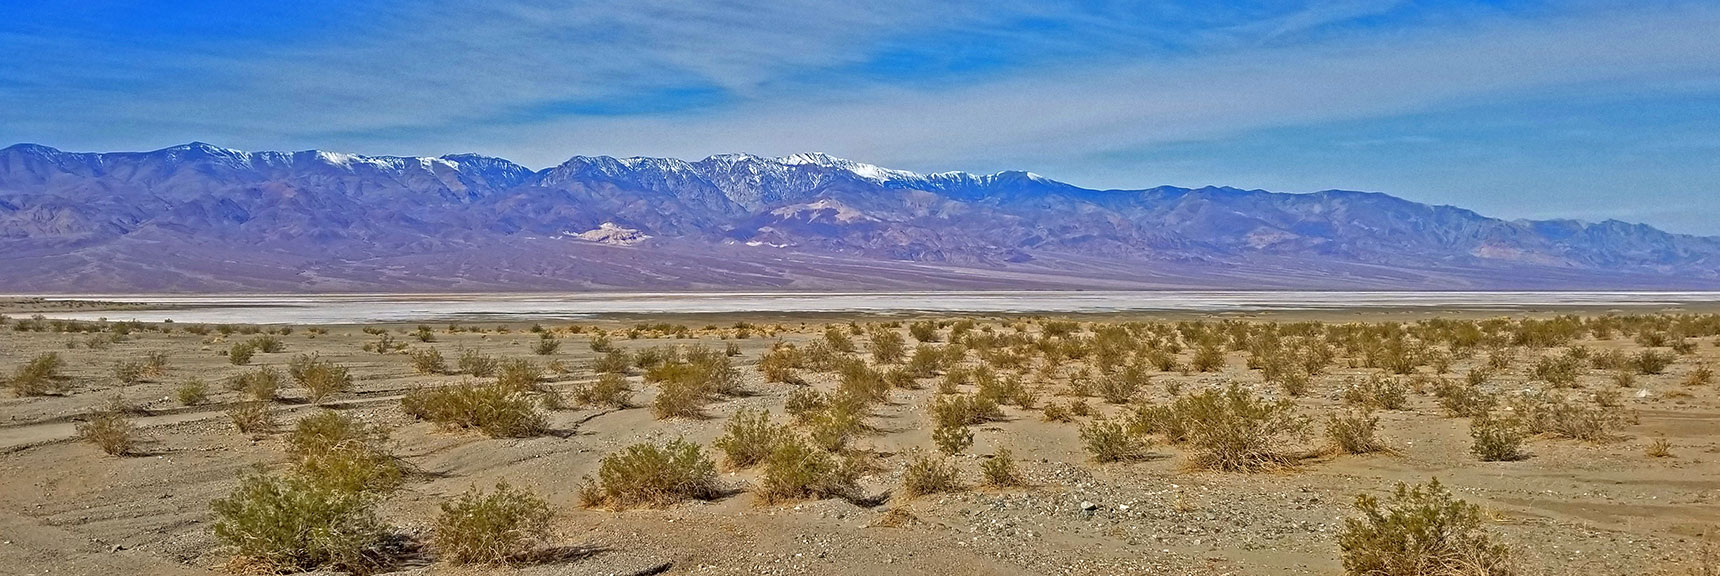 View from the Trailhead Across Southern Death Valley to the Panamint Range. | Willow Canyon | Death Valley National Park, California